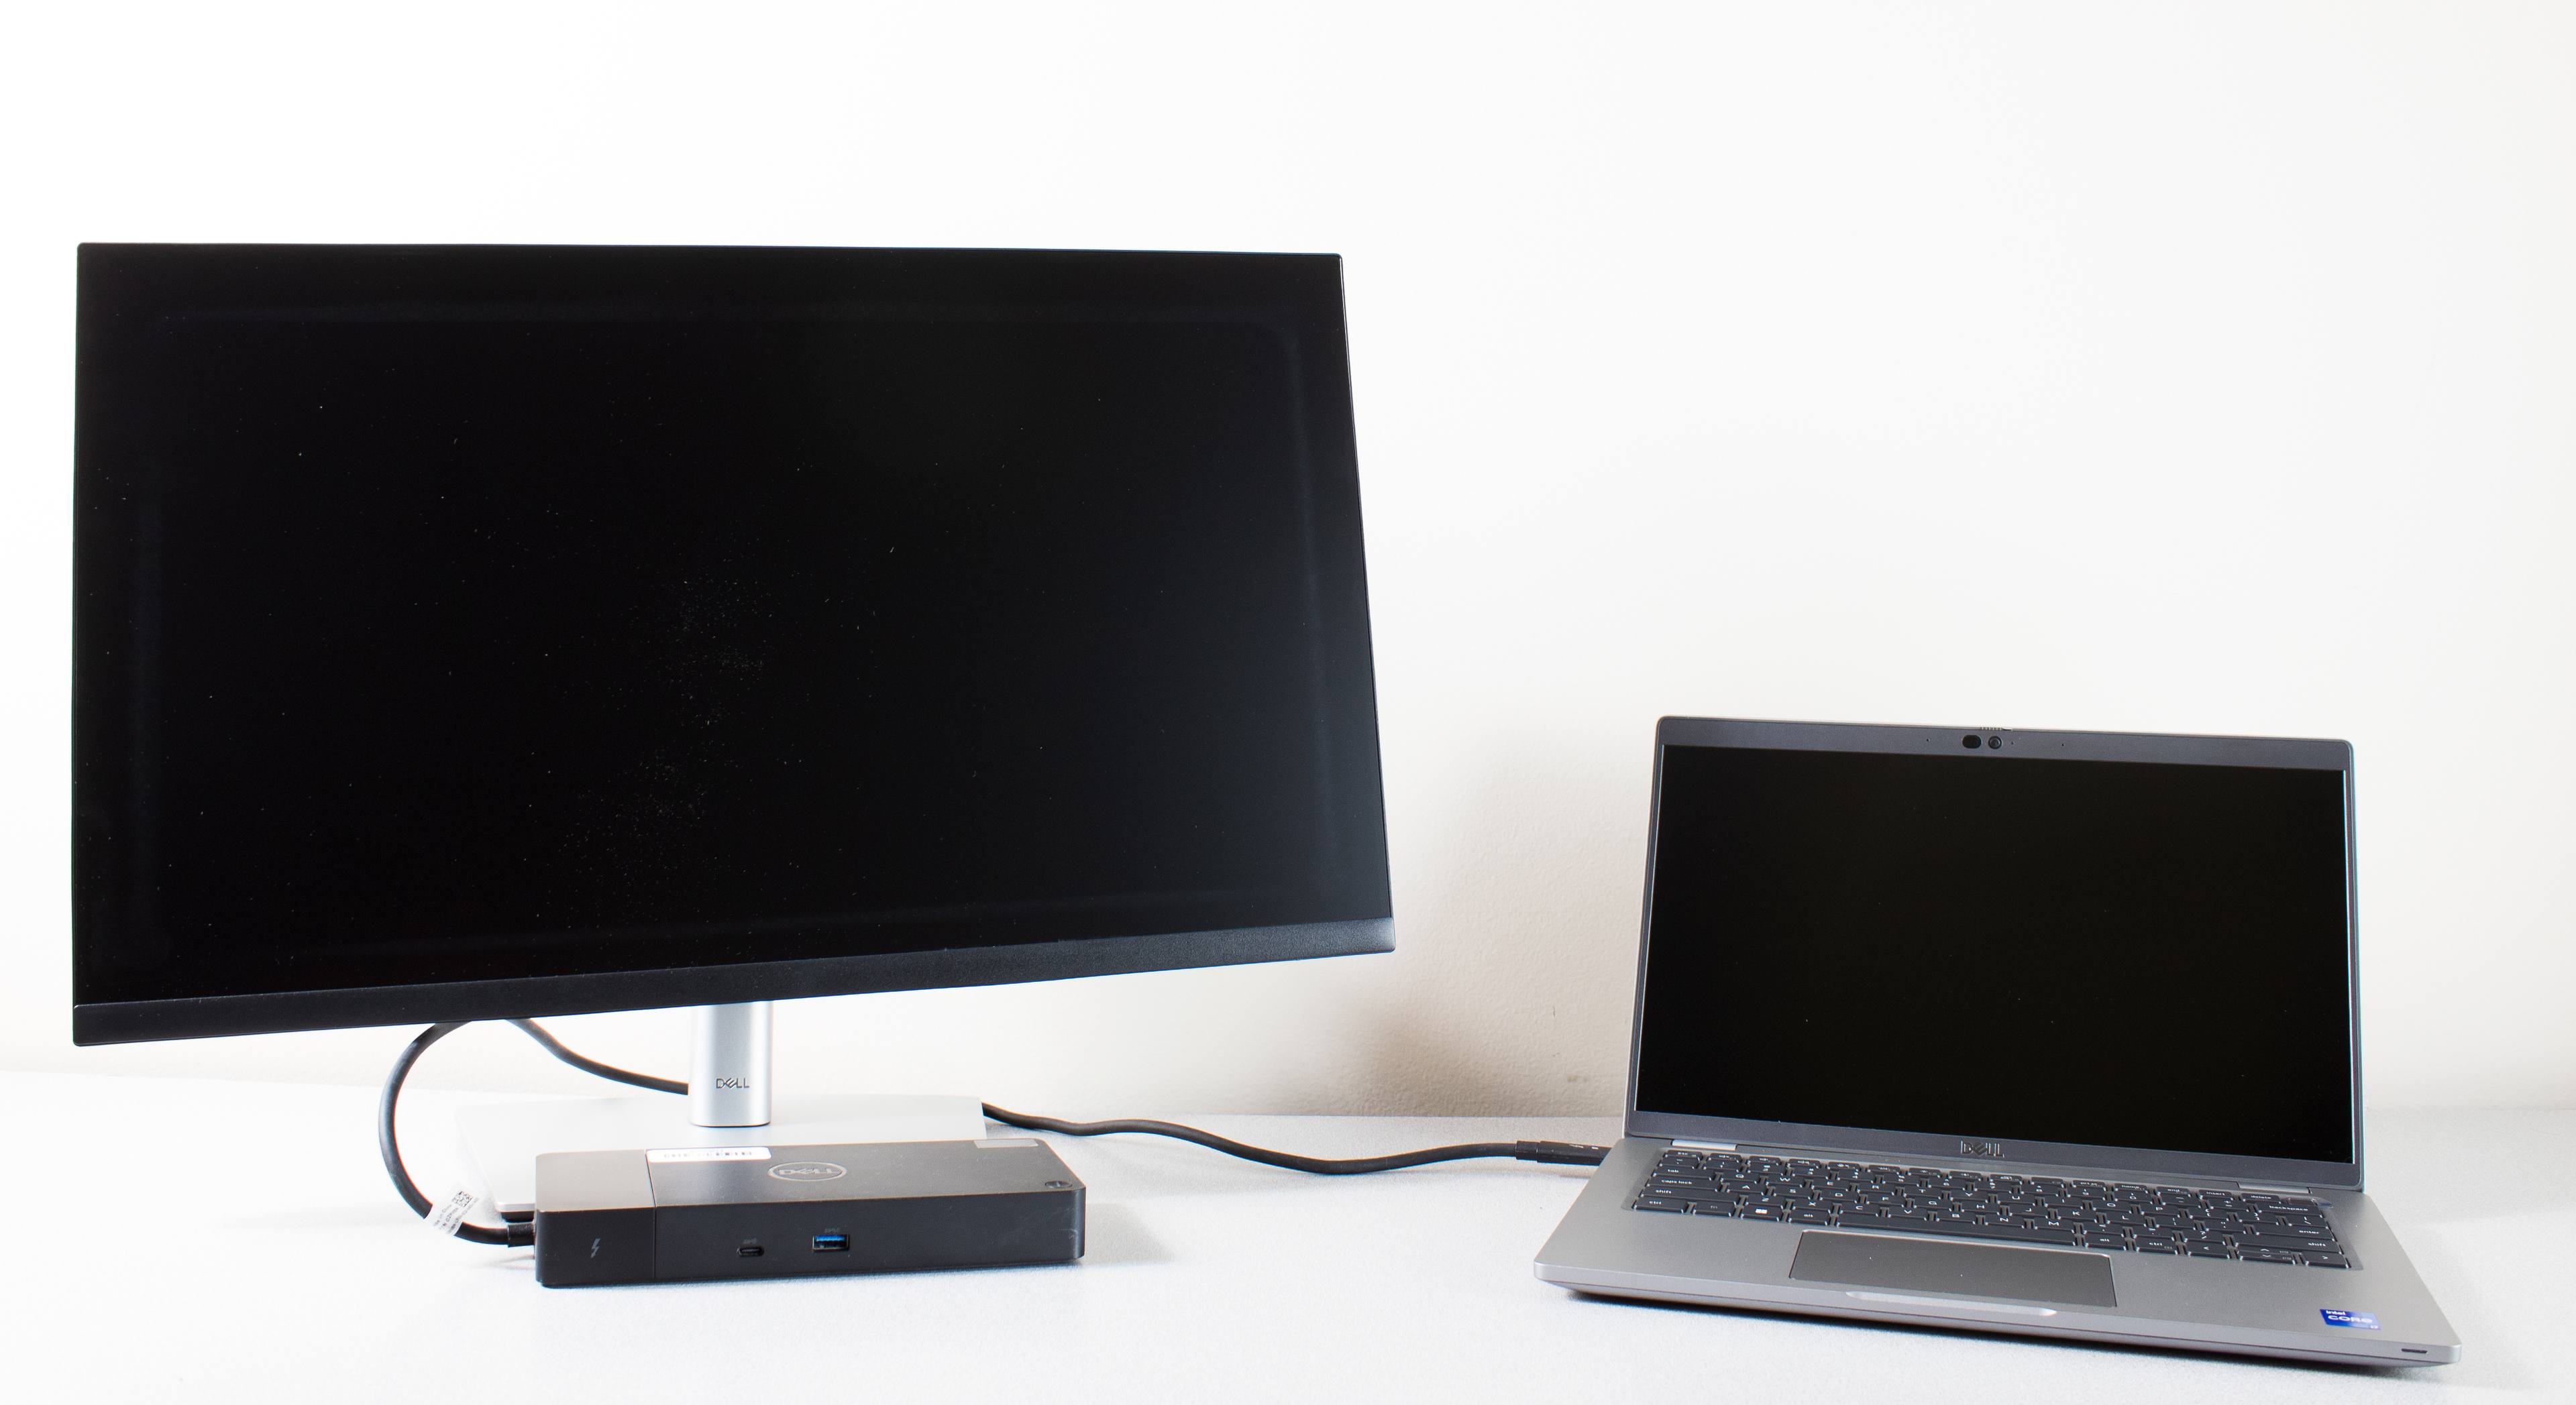 dell laptop with one monitor